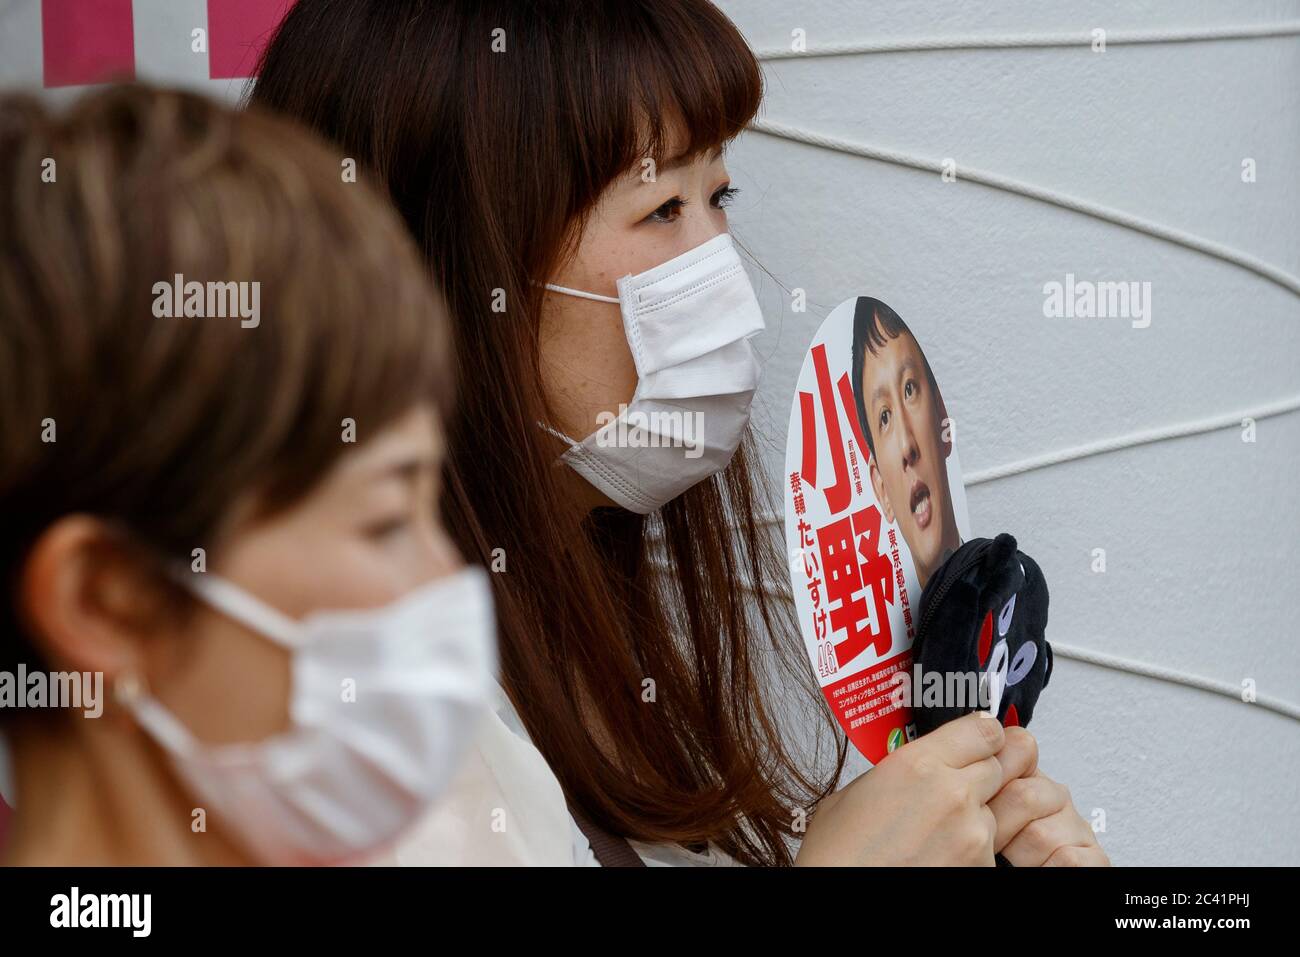 Tokyo, Japan. 23rd June, 2020. Voters listen to candidate Taisuke Ono's campaign speech for the Tokyo gubernatorial election outside Shimokitazawa Station. Ono, former vice governor of Kumamoto Prefecture, is campaigning for the Tokyo gubernatorial election, which will be held on July 5. Credit: Rodrigo Reyes Marin/ZUMA Wire/Alamy Live News Stock Photo